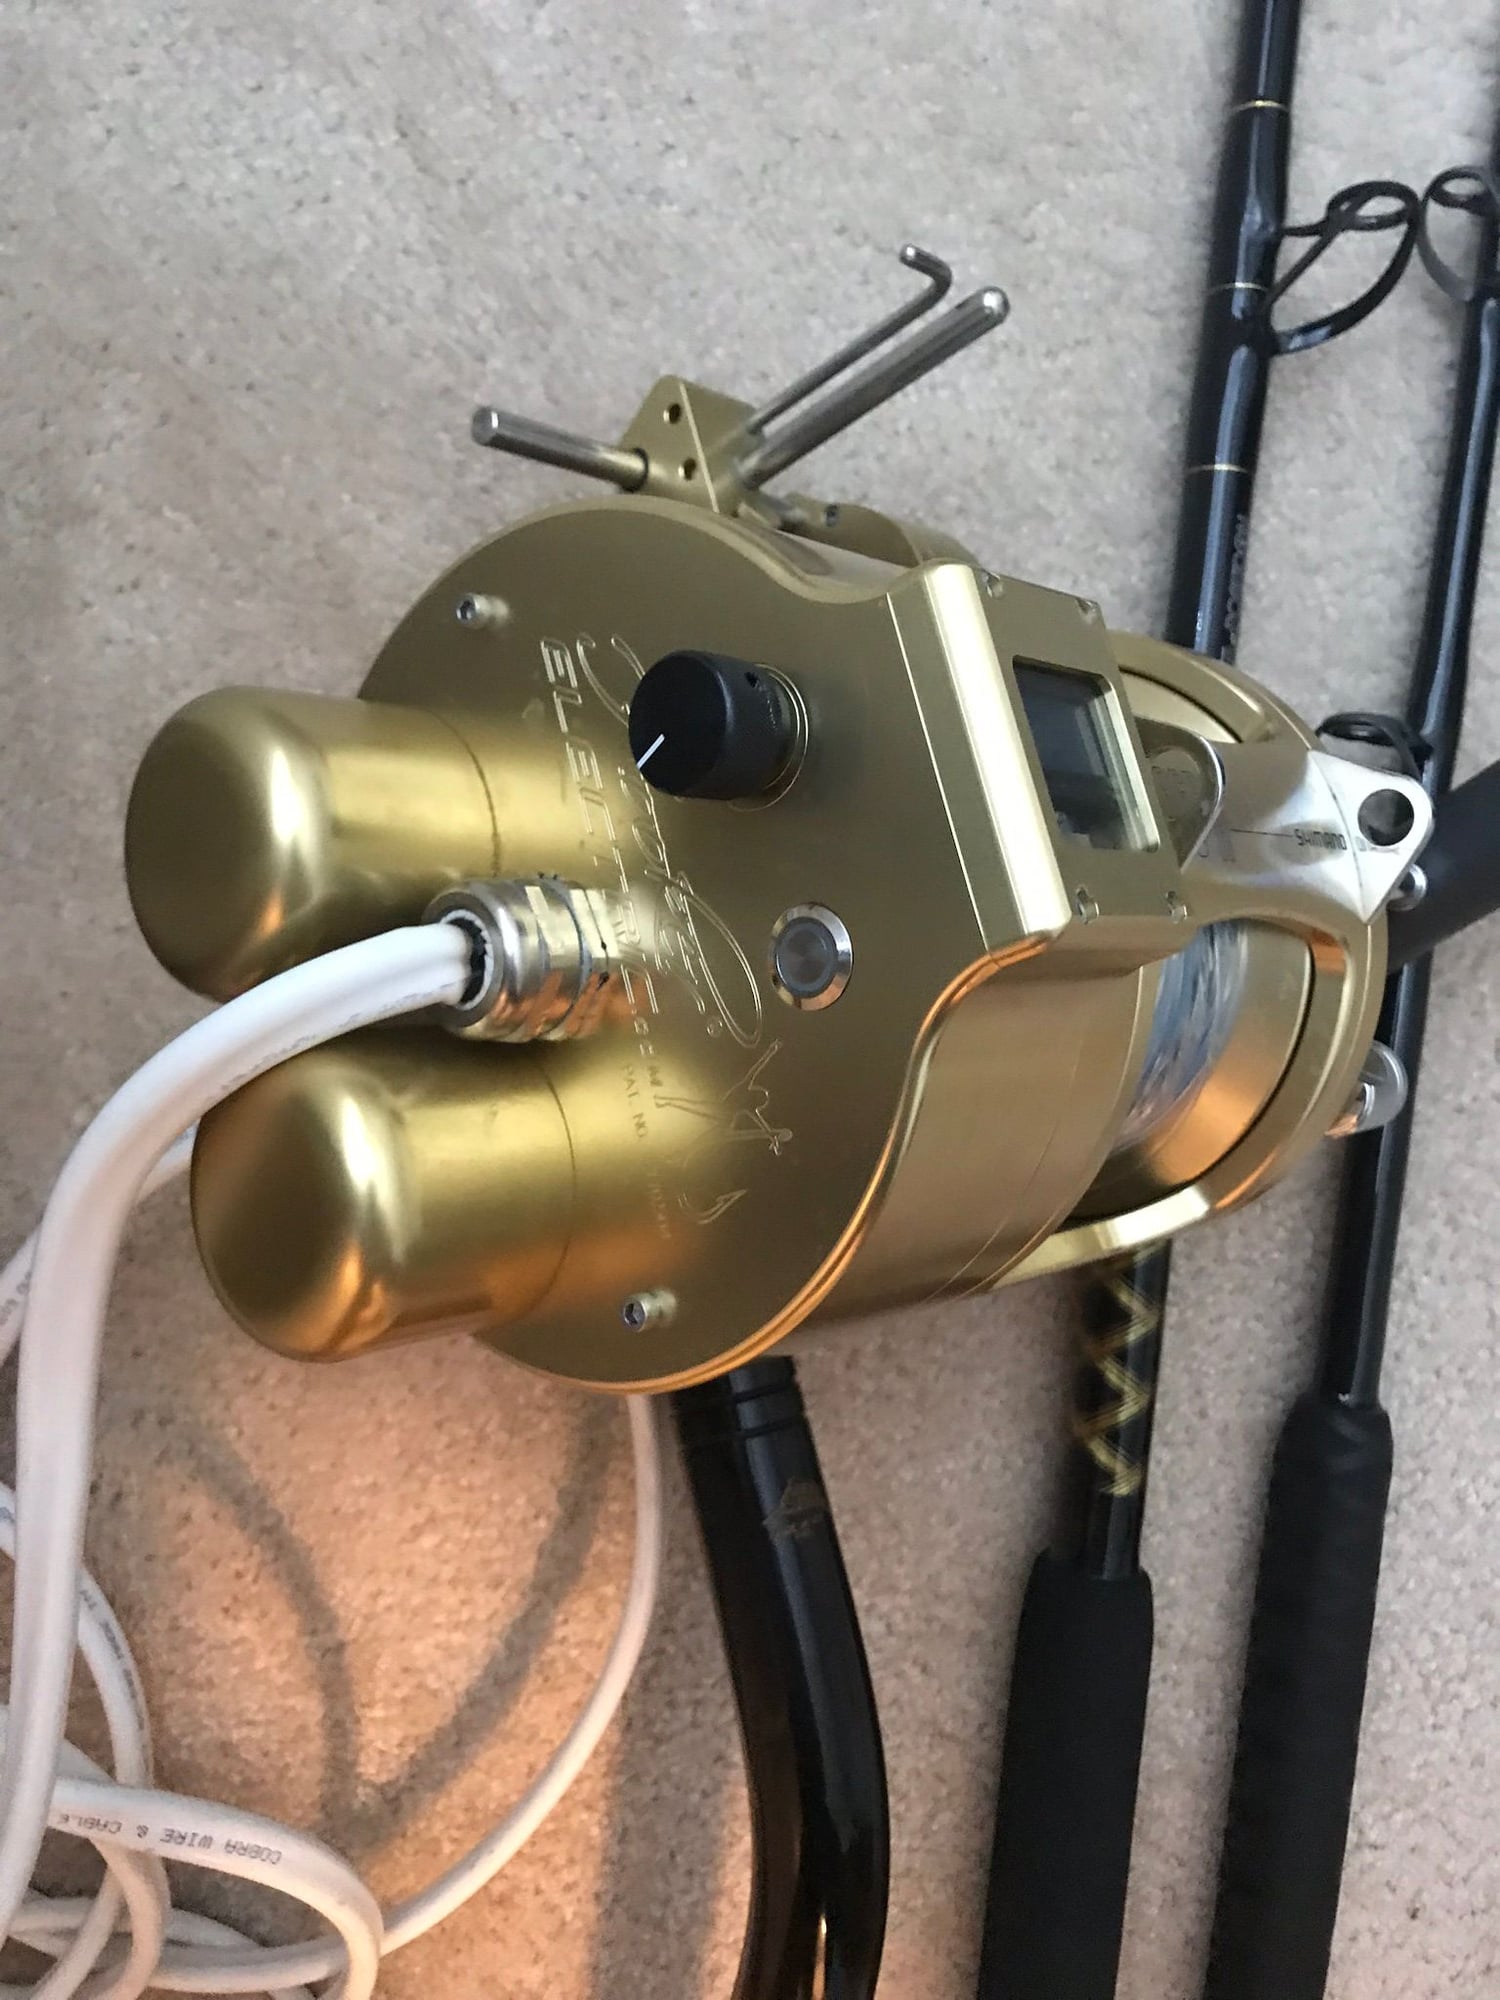 Broke down and bought a older electric reel